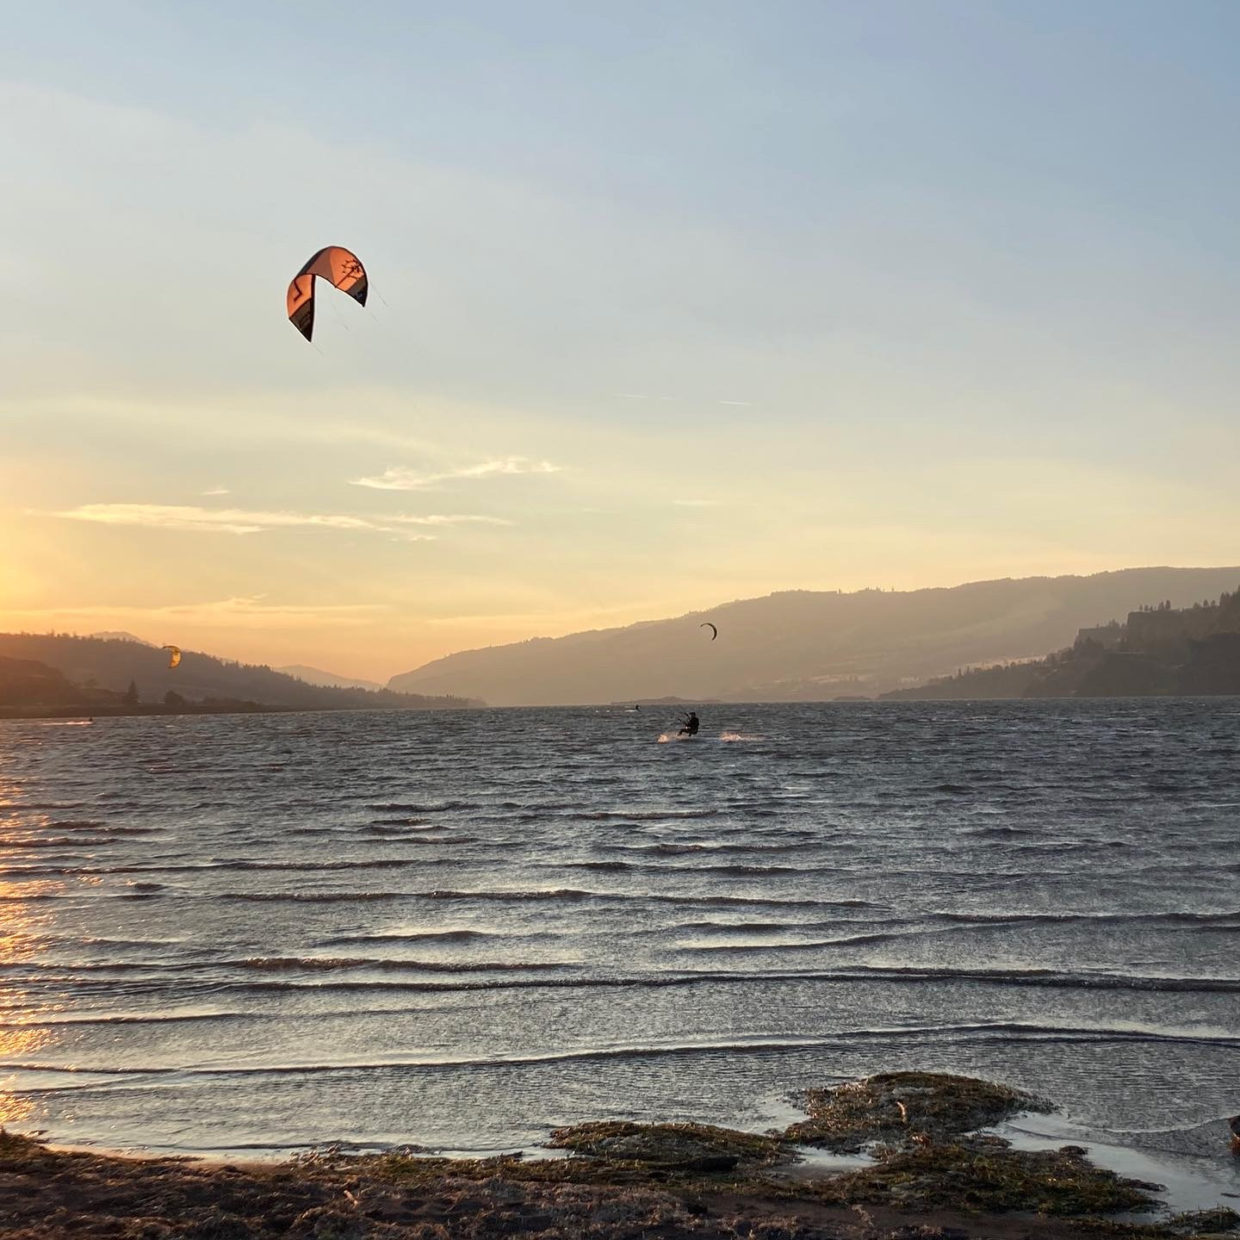 Kite Surfing in Columbia River Gorge